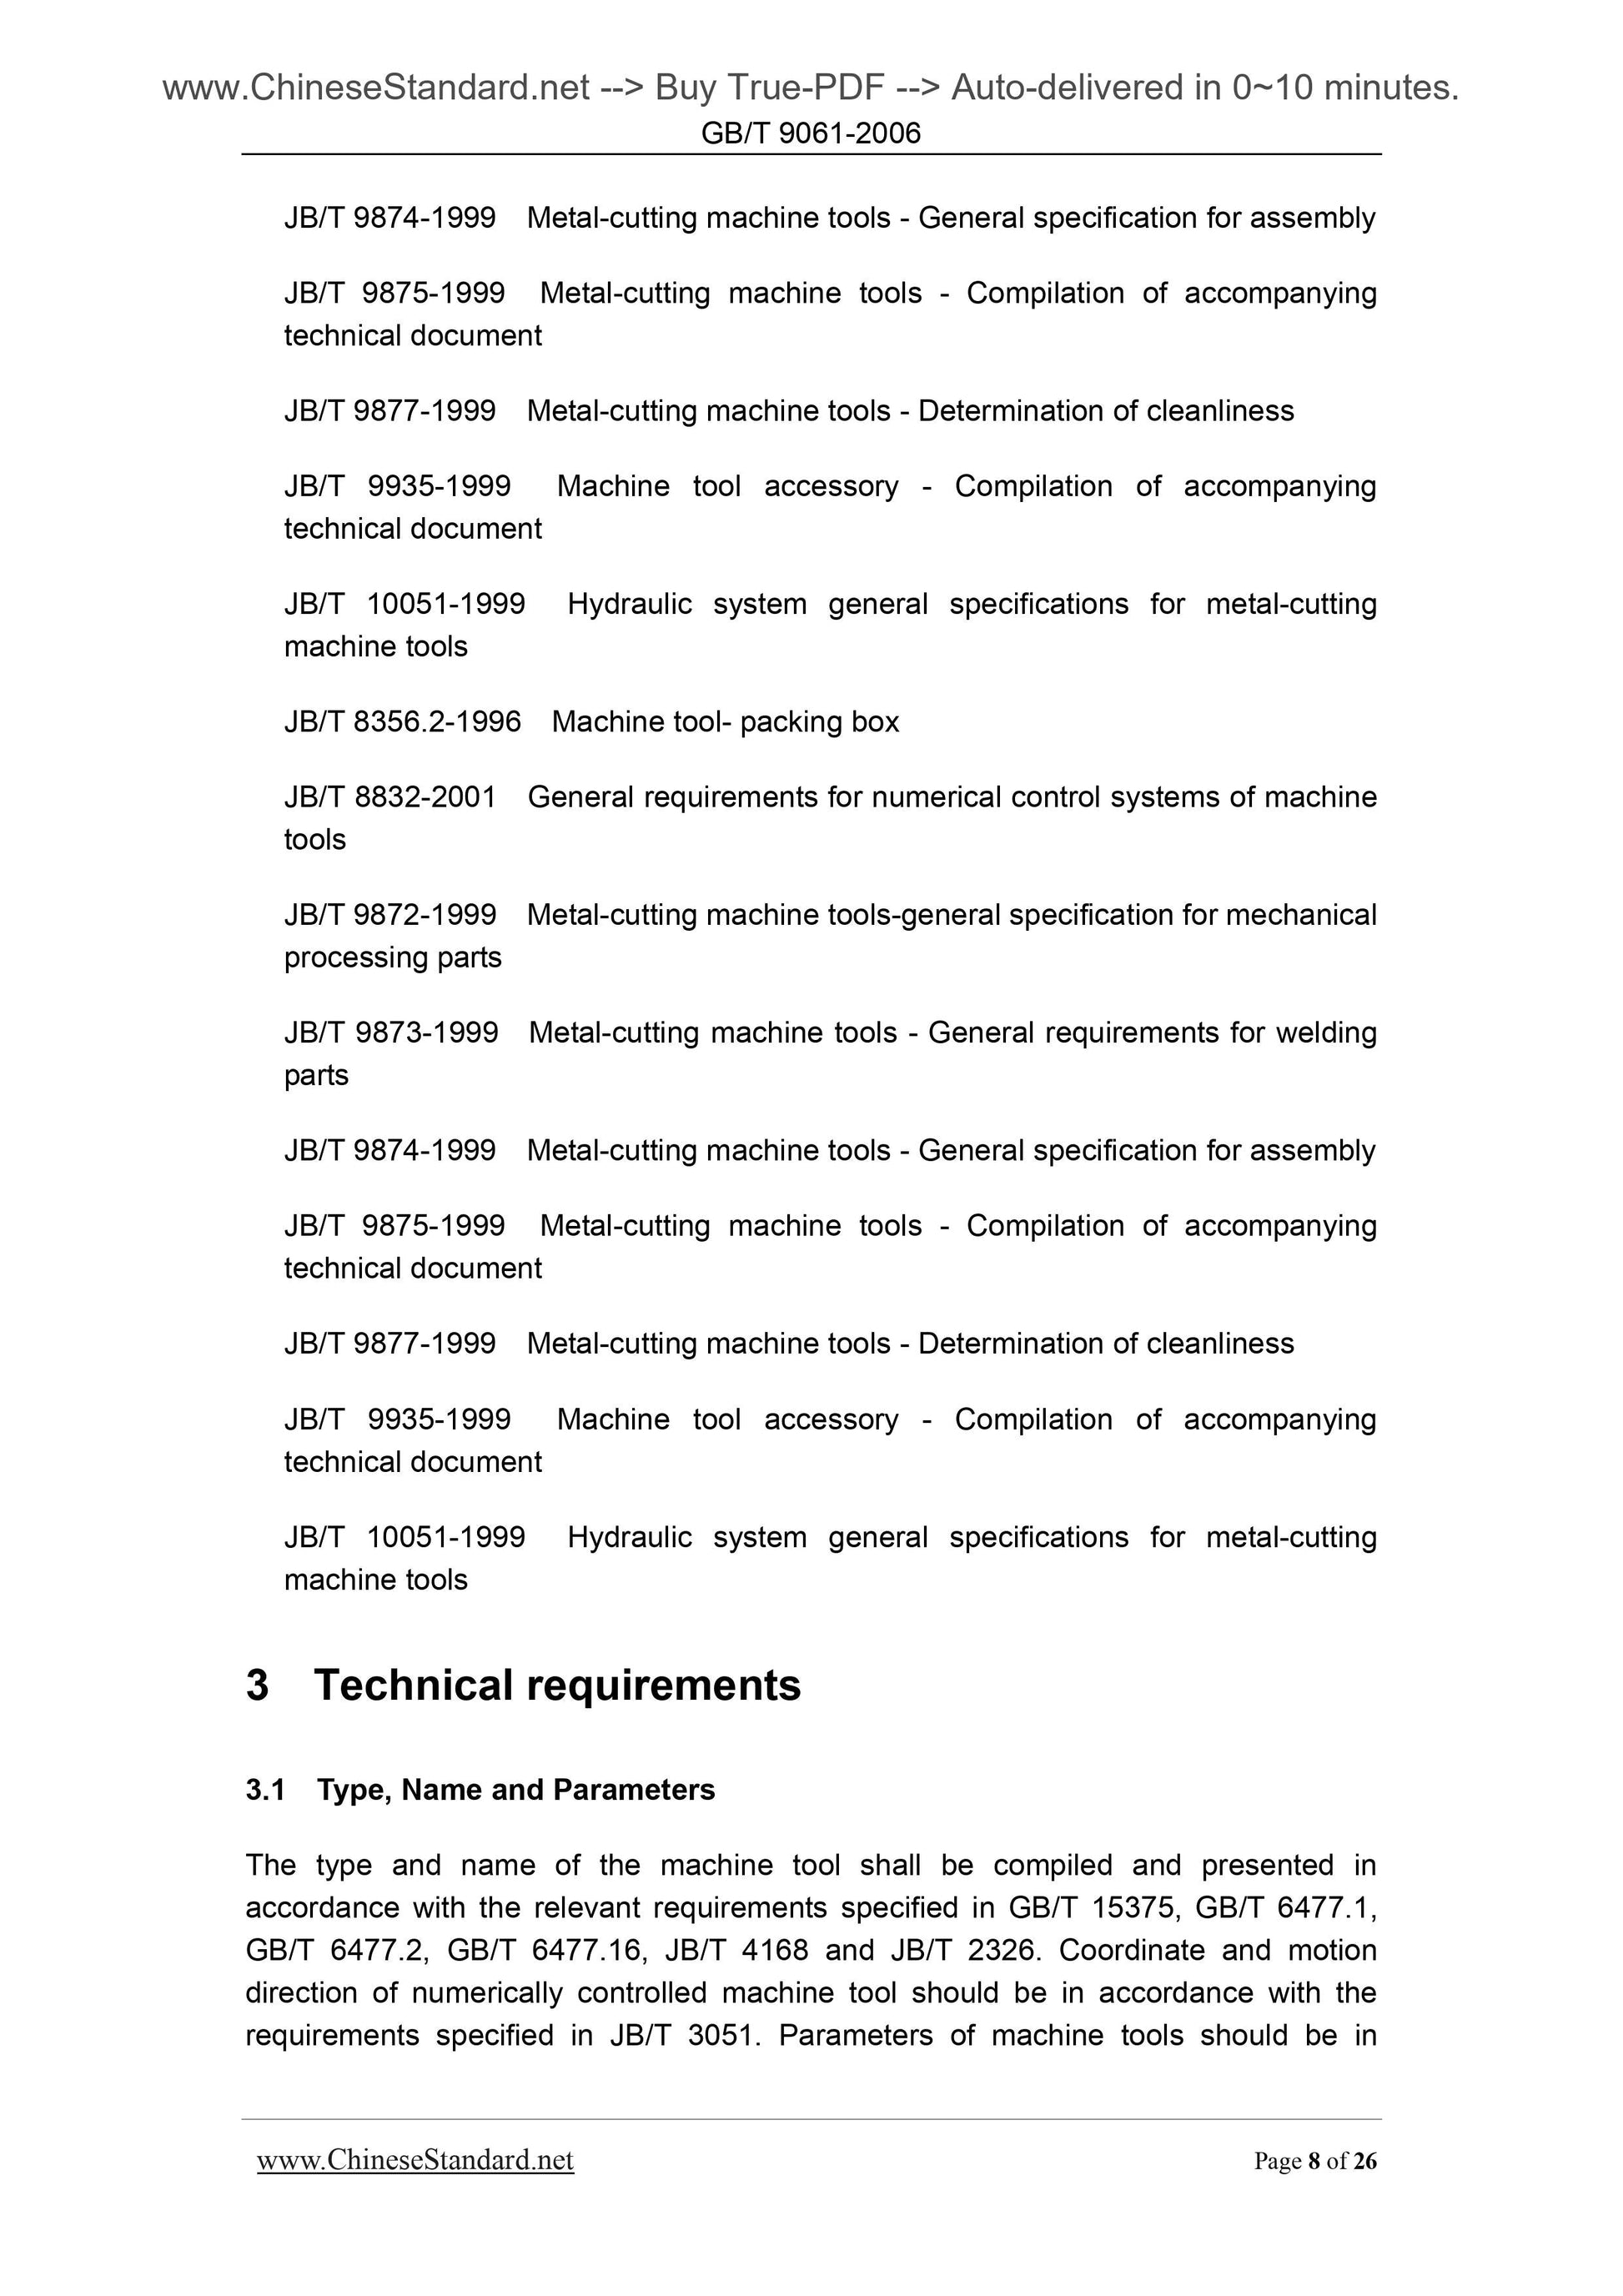 GB/T 9061-2006 Page 7